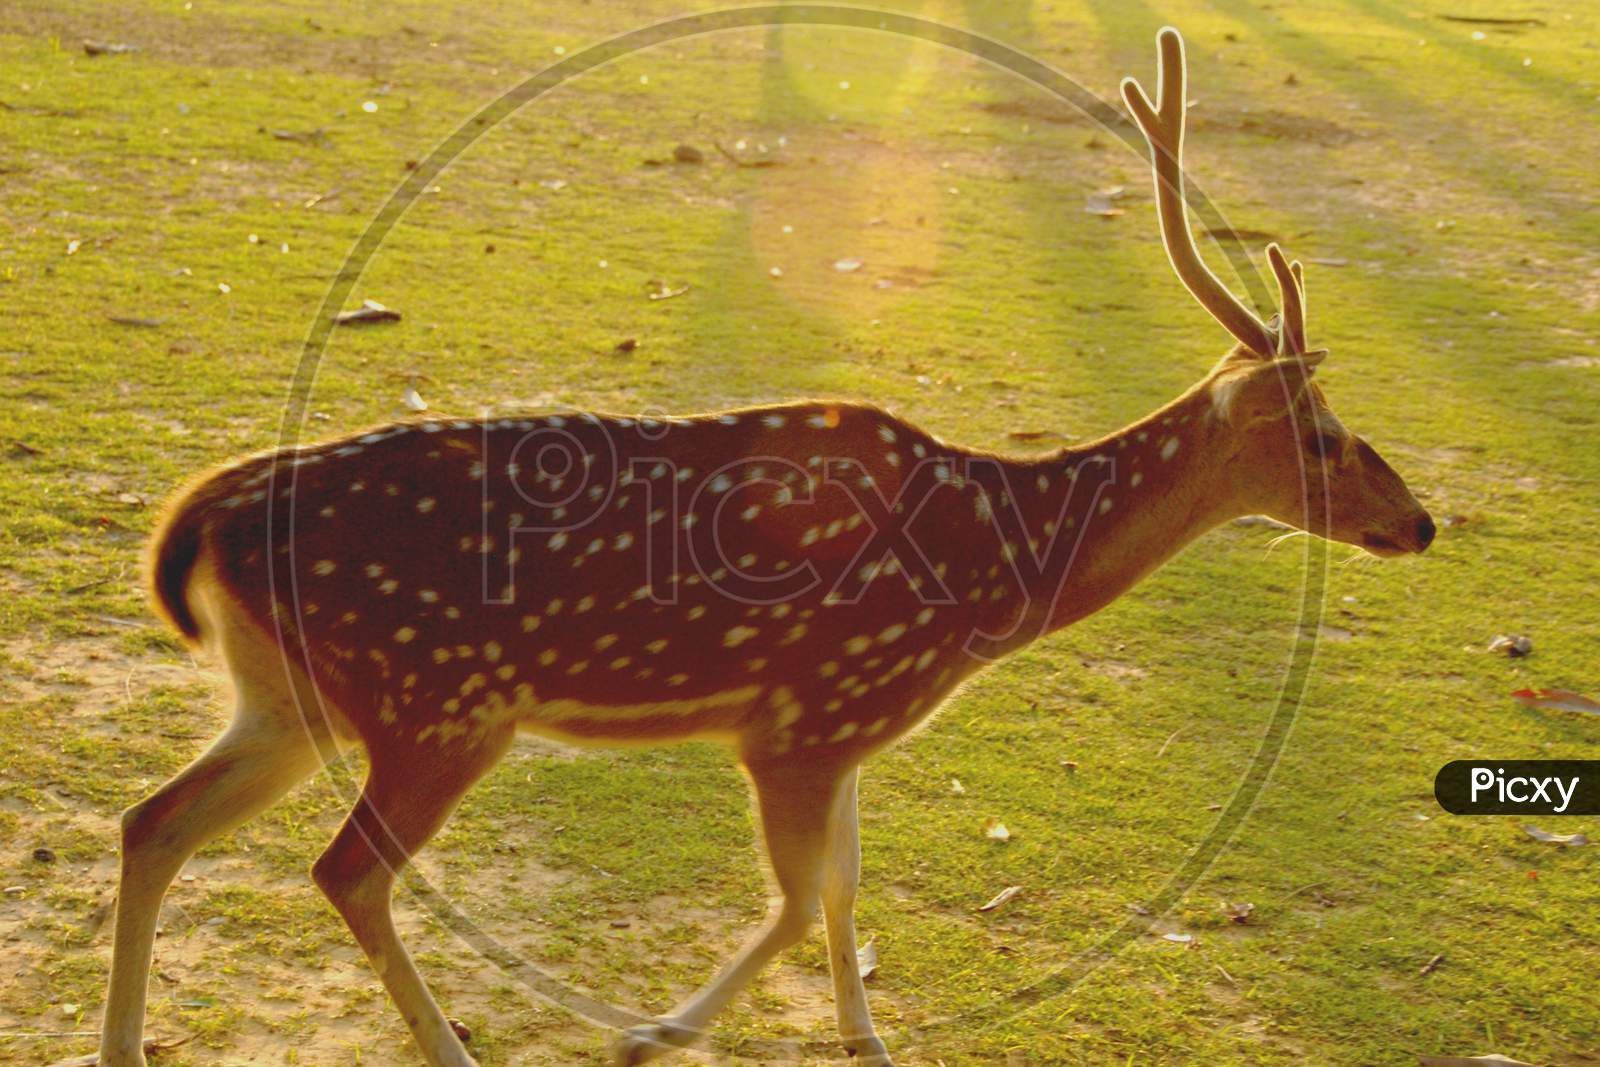 Dotted Deer in a Zoo